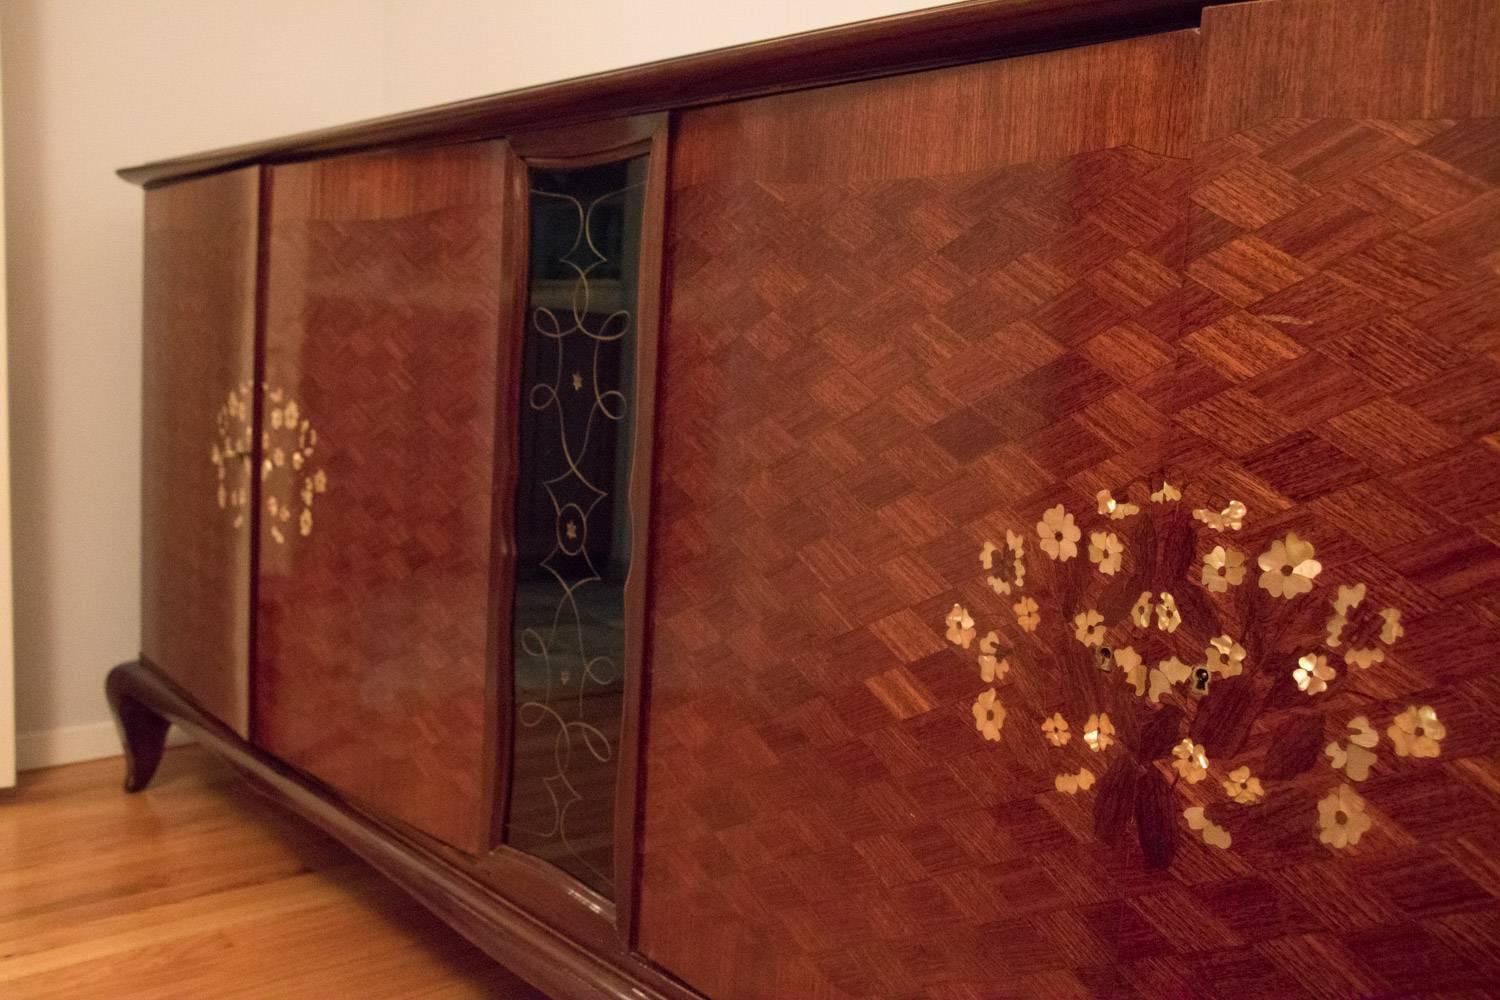 Mid Century Modern Rare Brazilian Rosewood Deco Sideboard!  Stunning Inlay Jules Leleu Style. 
Stunning Mother of Pearl Inlay Design Circa 1940. 
Made of Solid Gorgeous and Rare Brazilian Rosewood.  Fabulous Storage Shelving and Drawers all Rare and